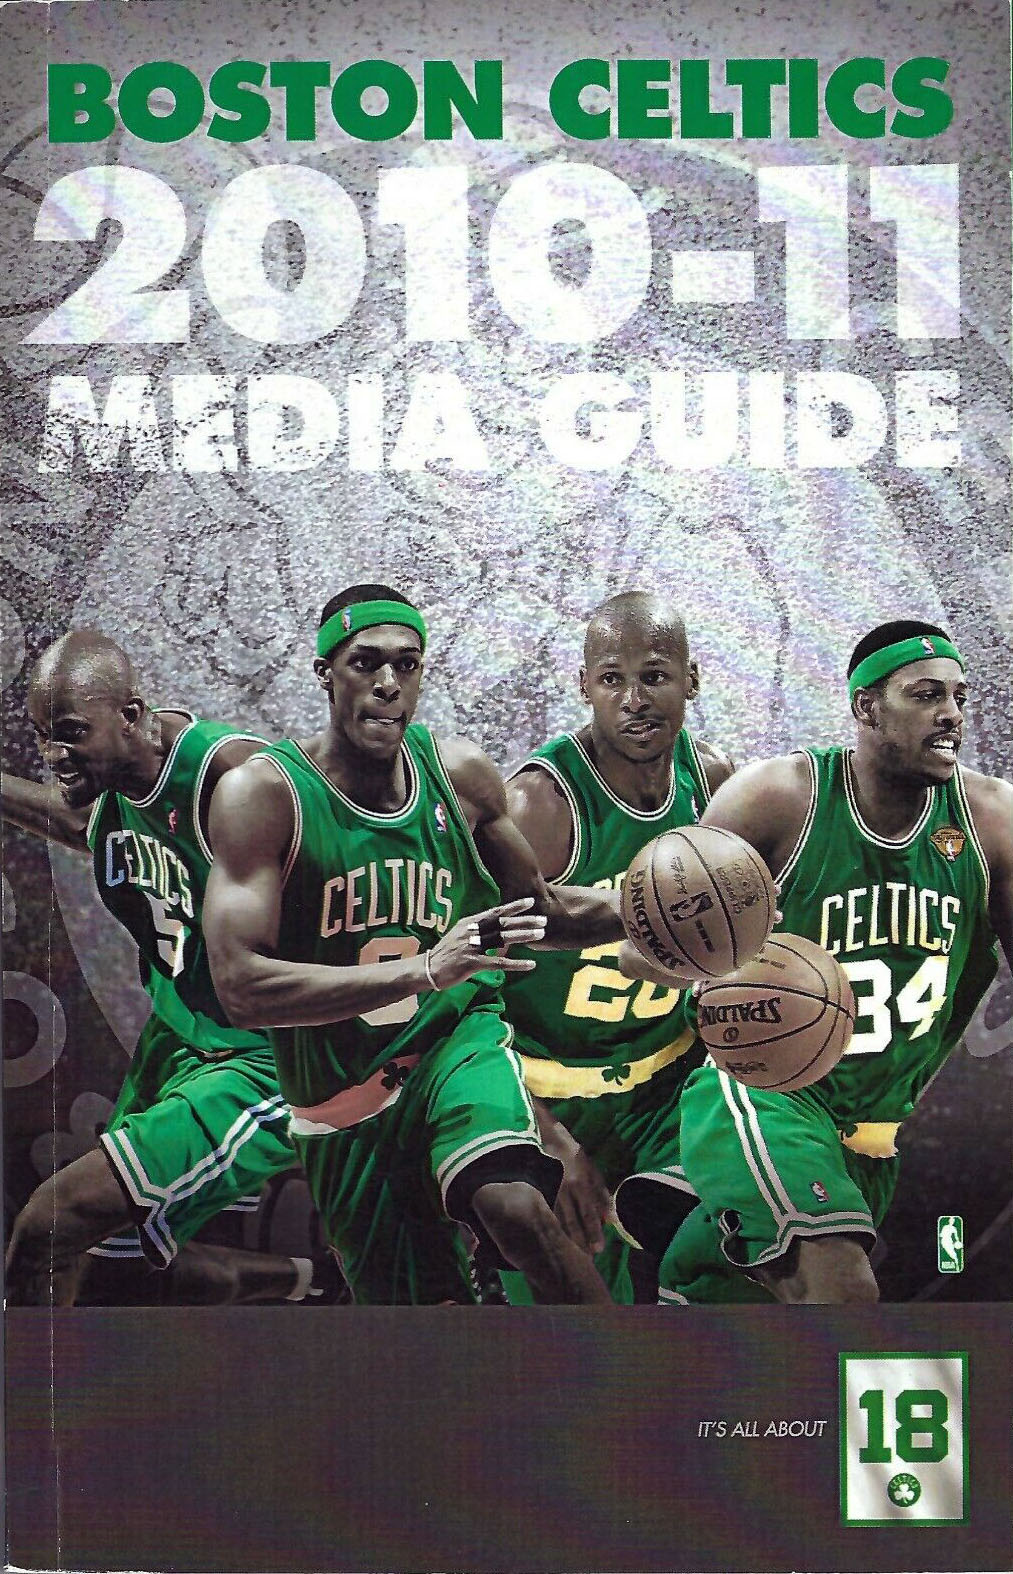 Boston Celtics Media Guides and Yearbooks SportsPaper.info